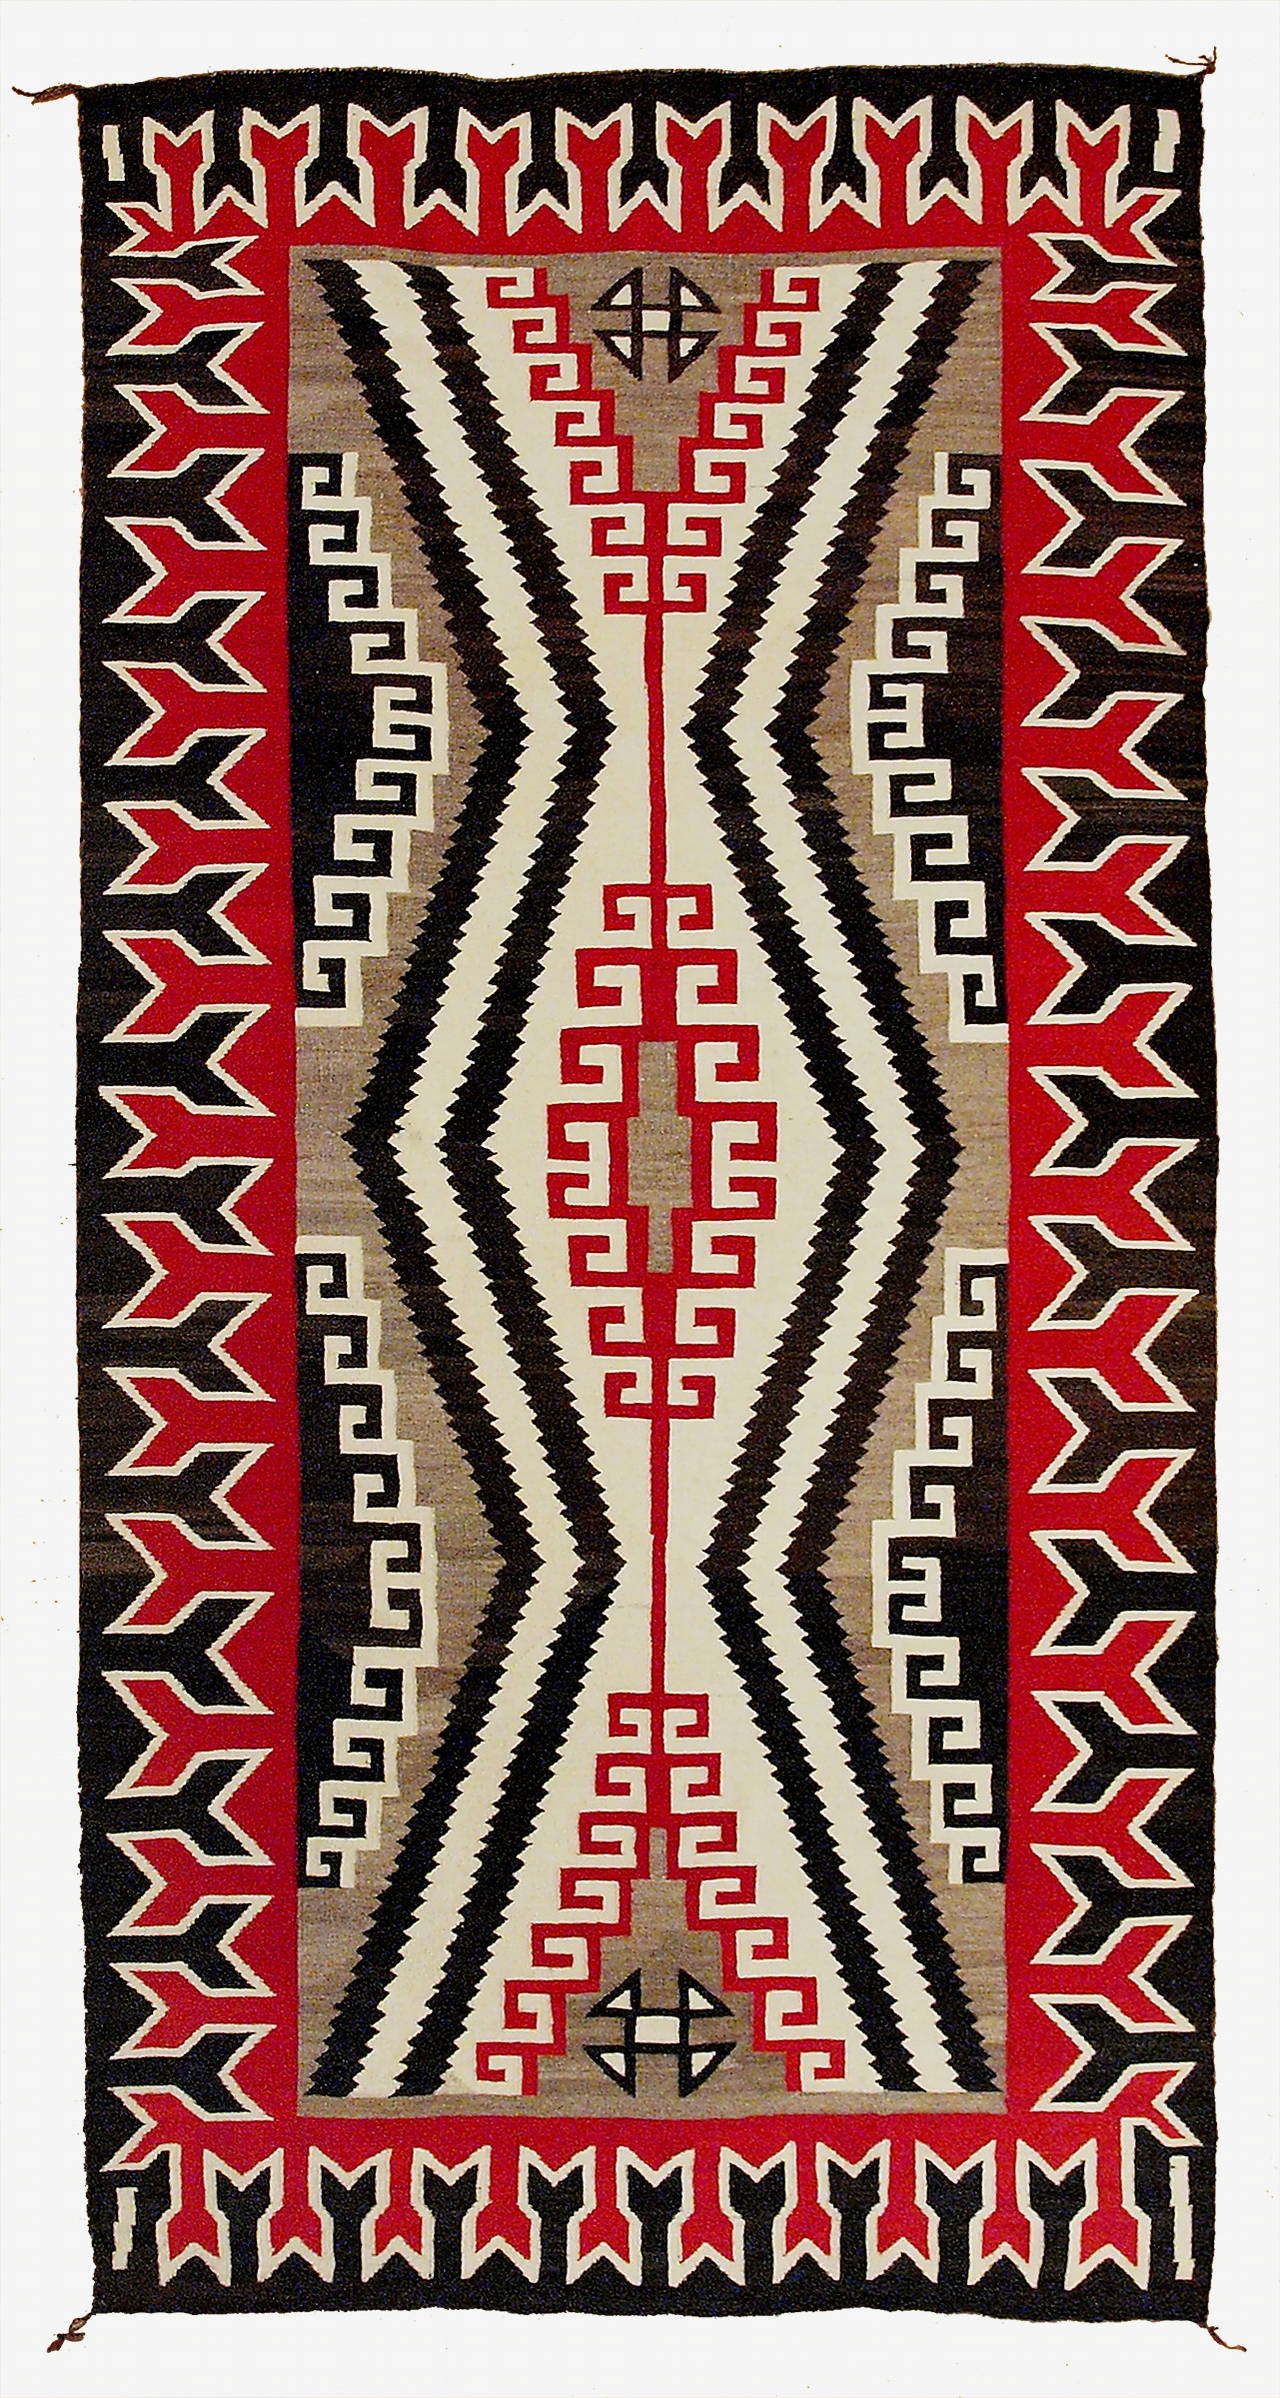 A Pan reservation or regional rug woven of native hand-spun wool with natural ivory, black and gray fleece with aniline red.  The border consists of a stylized Buffalo track motif.

This textile is well suited for display as a wall hanging or as